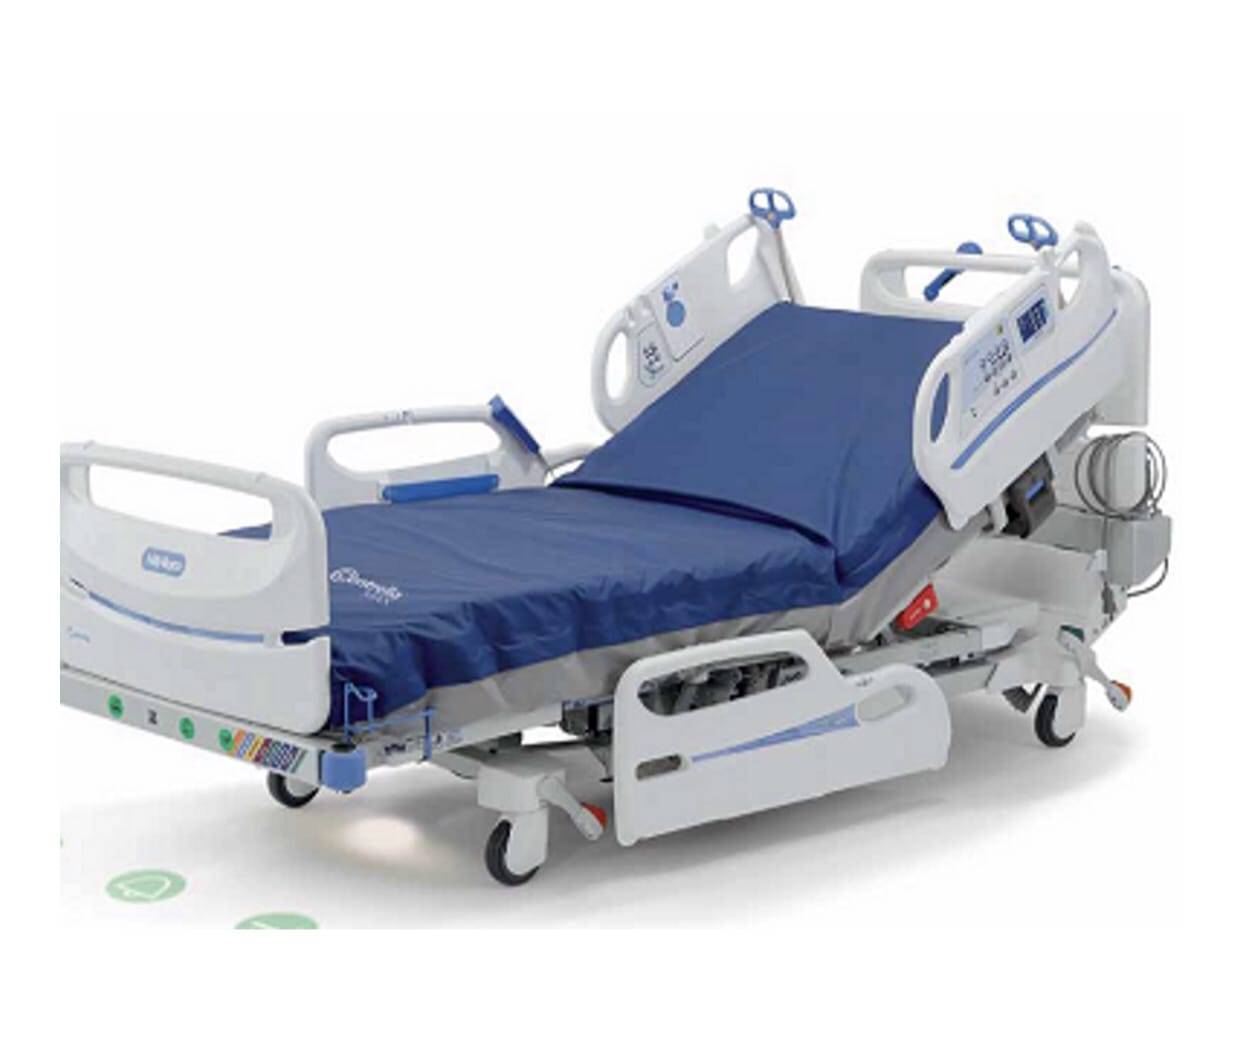 About Hospital Bed Rentals